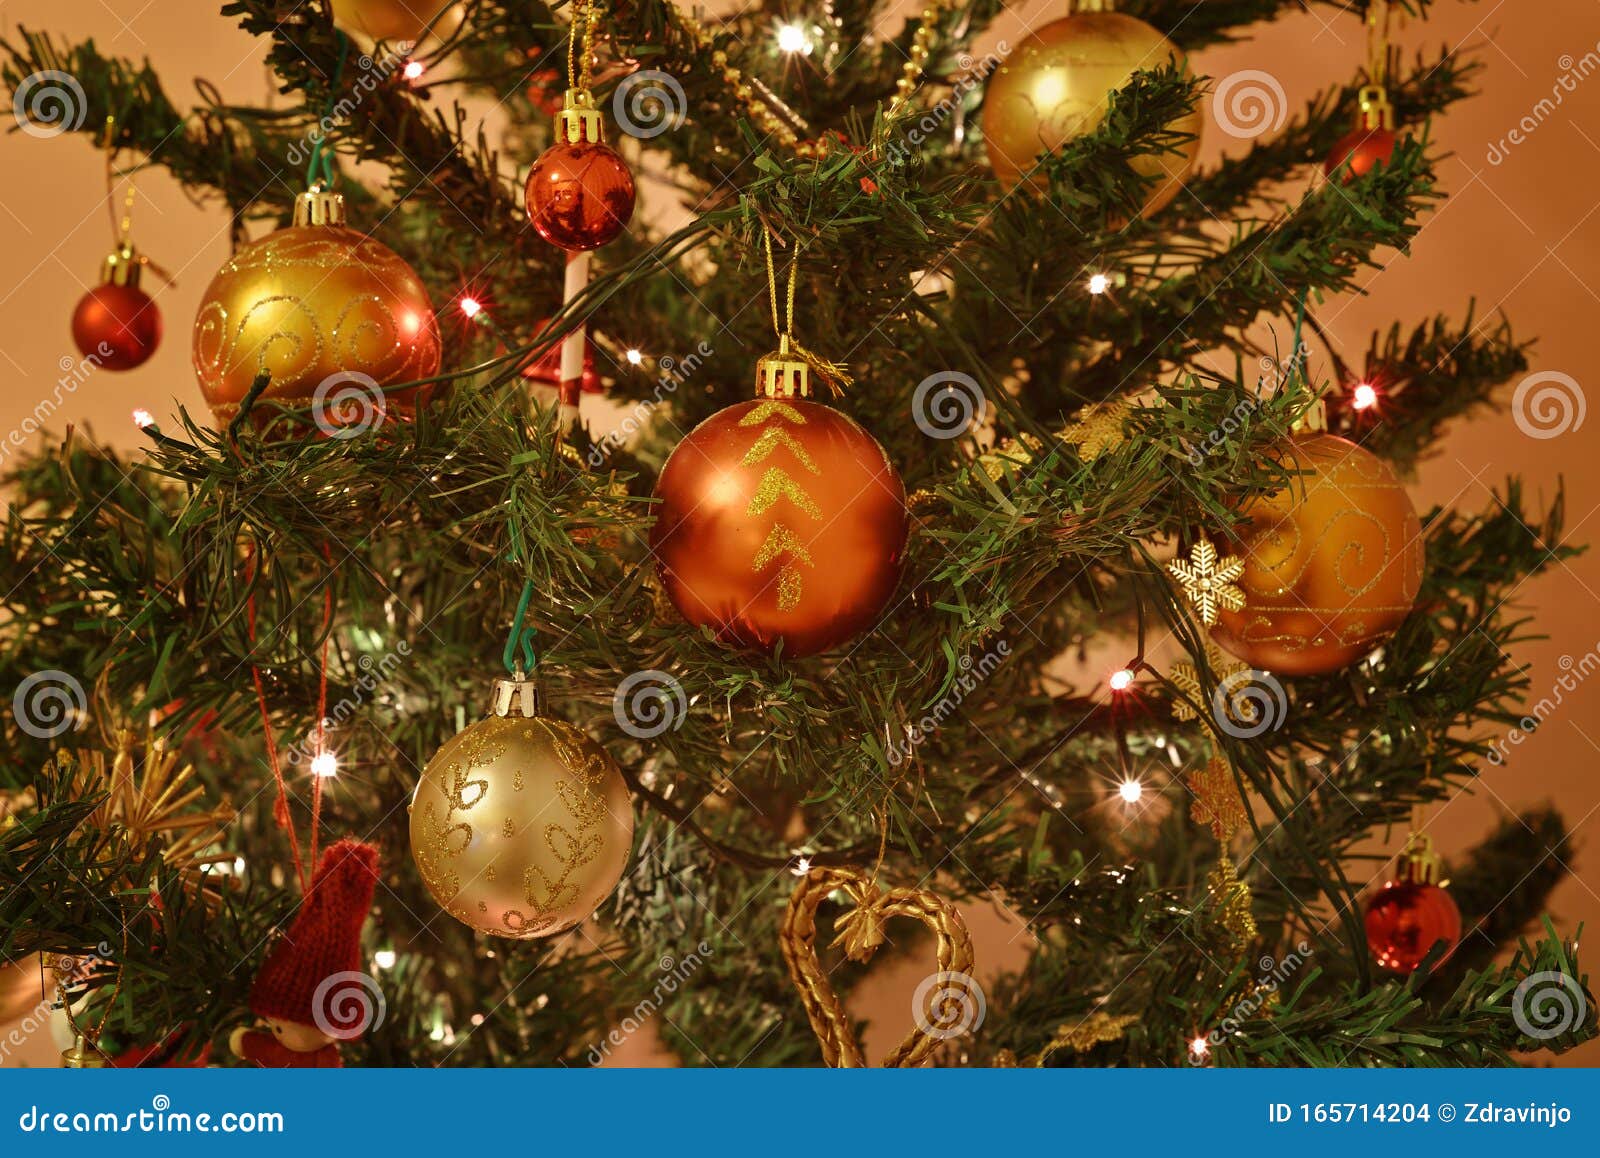 Christmas Tree Decorated with Ornaments and Blinking Light Bulbs Stock ...